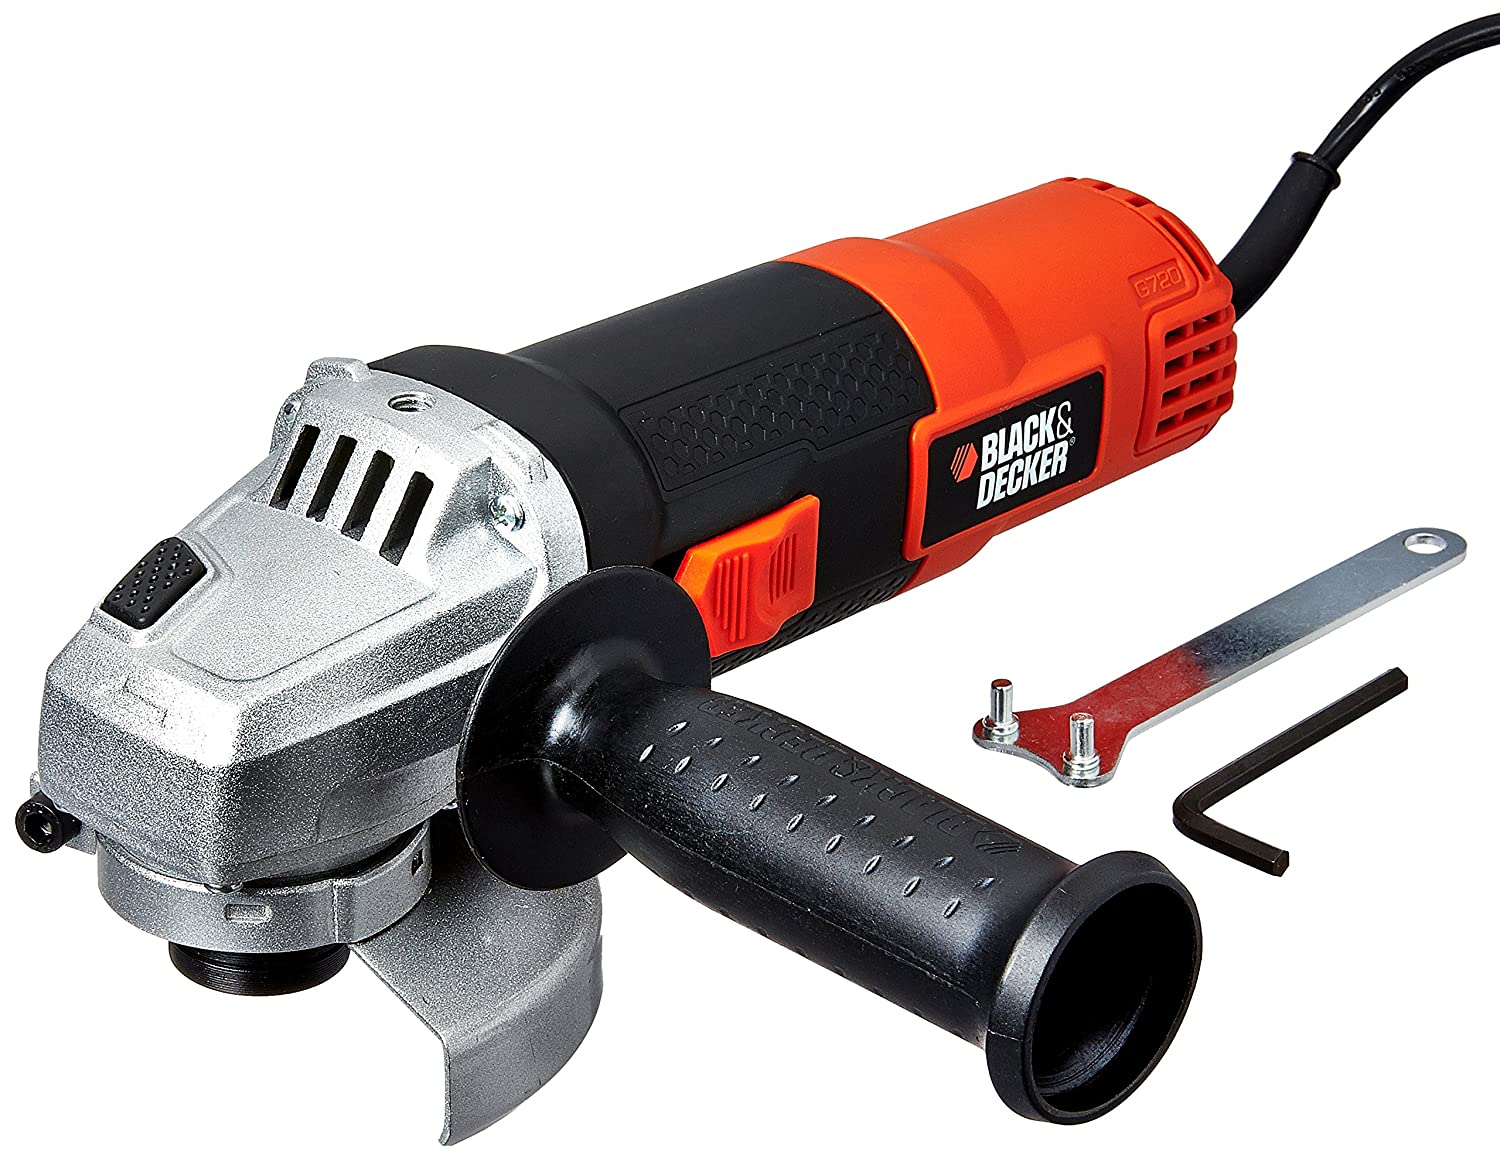 BLACK + DECKER G720 820W 4''/100mm Small Angle Grinder (Red